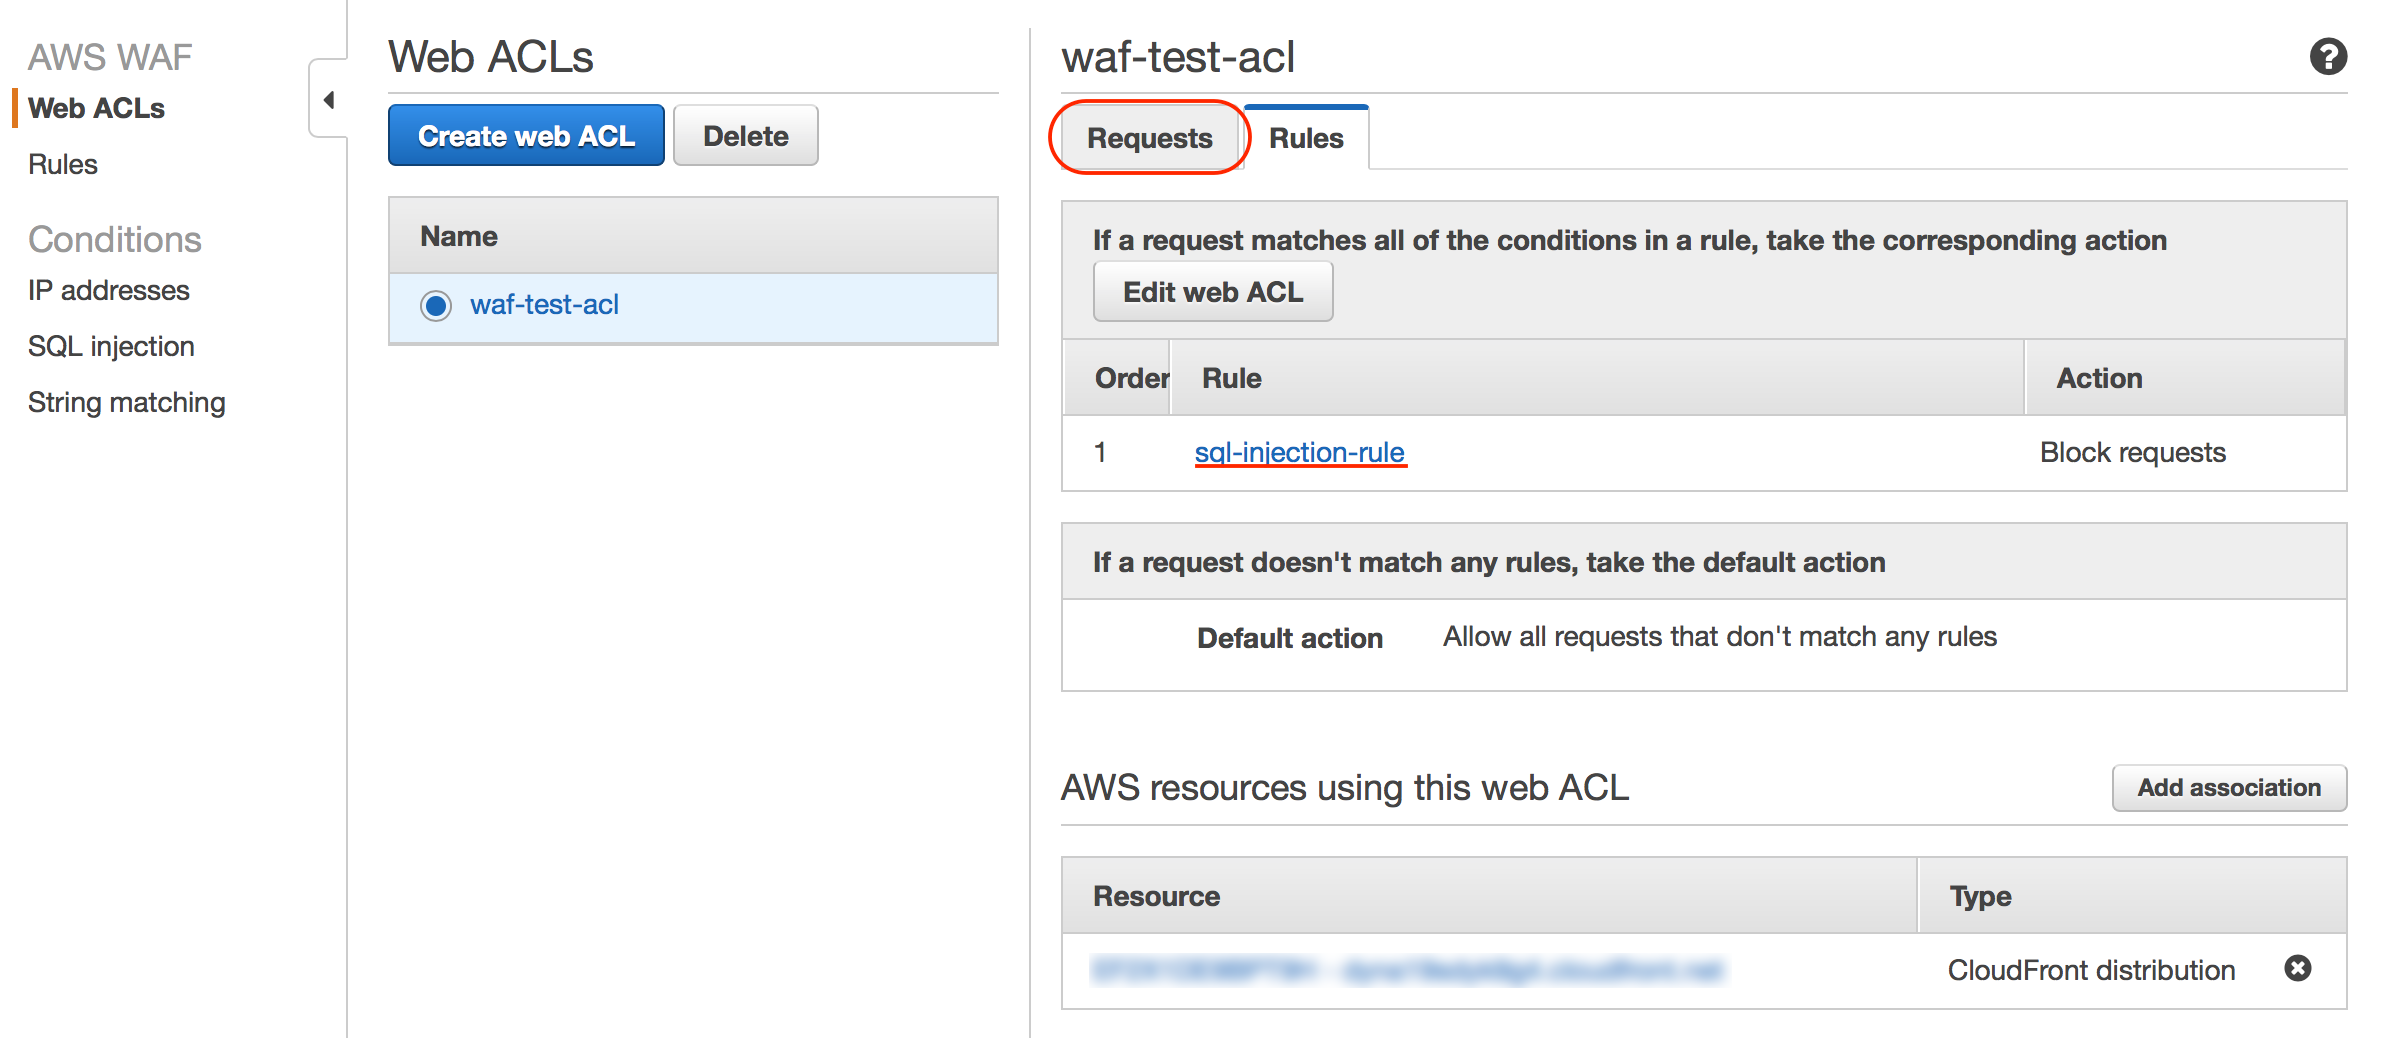 aws-waf_sql-injection_2015120412-1.png